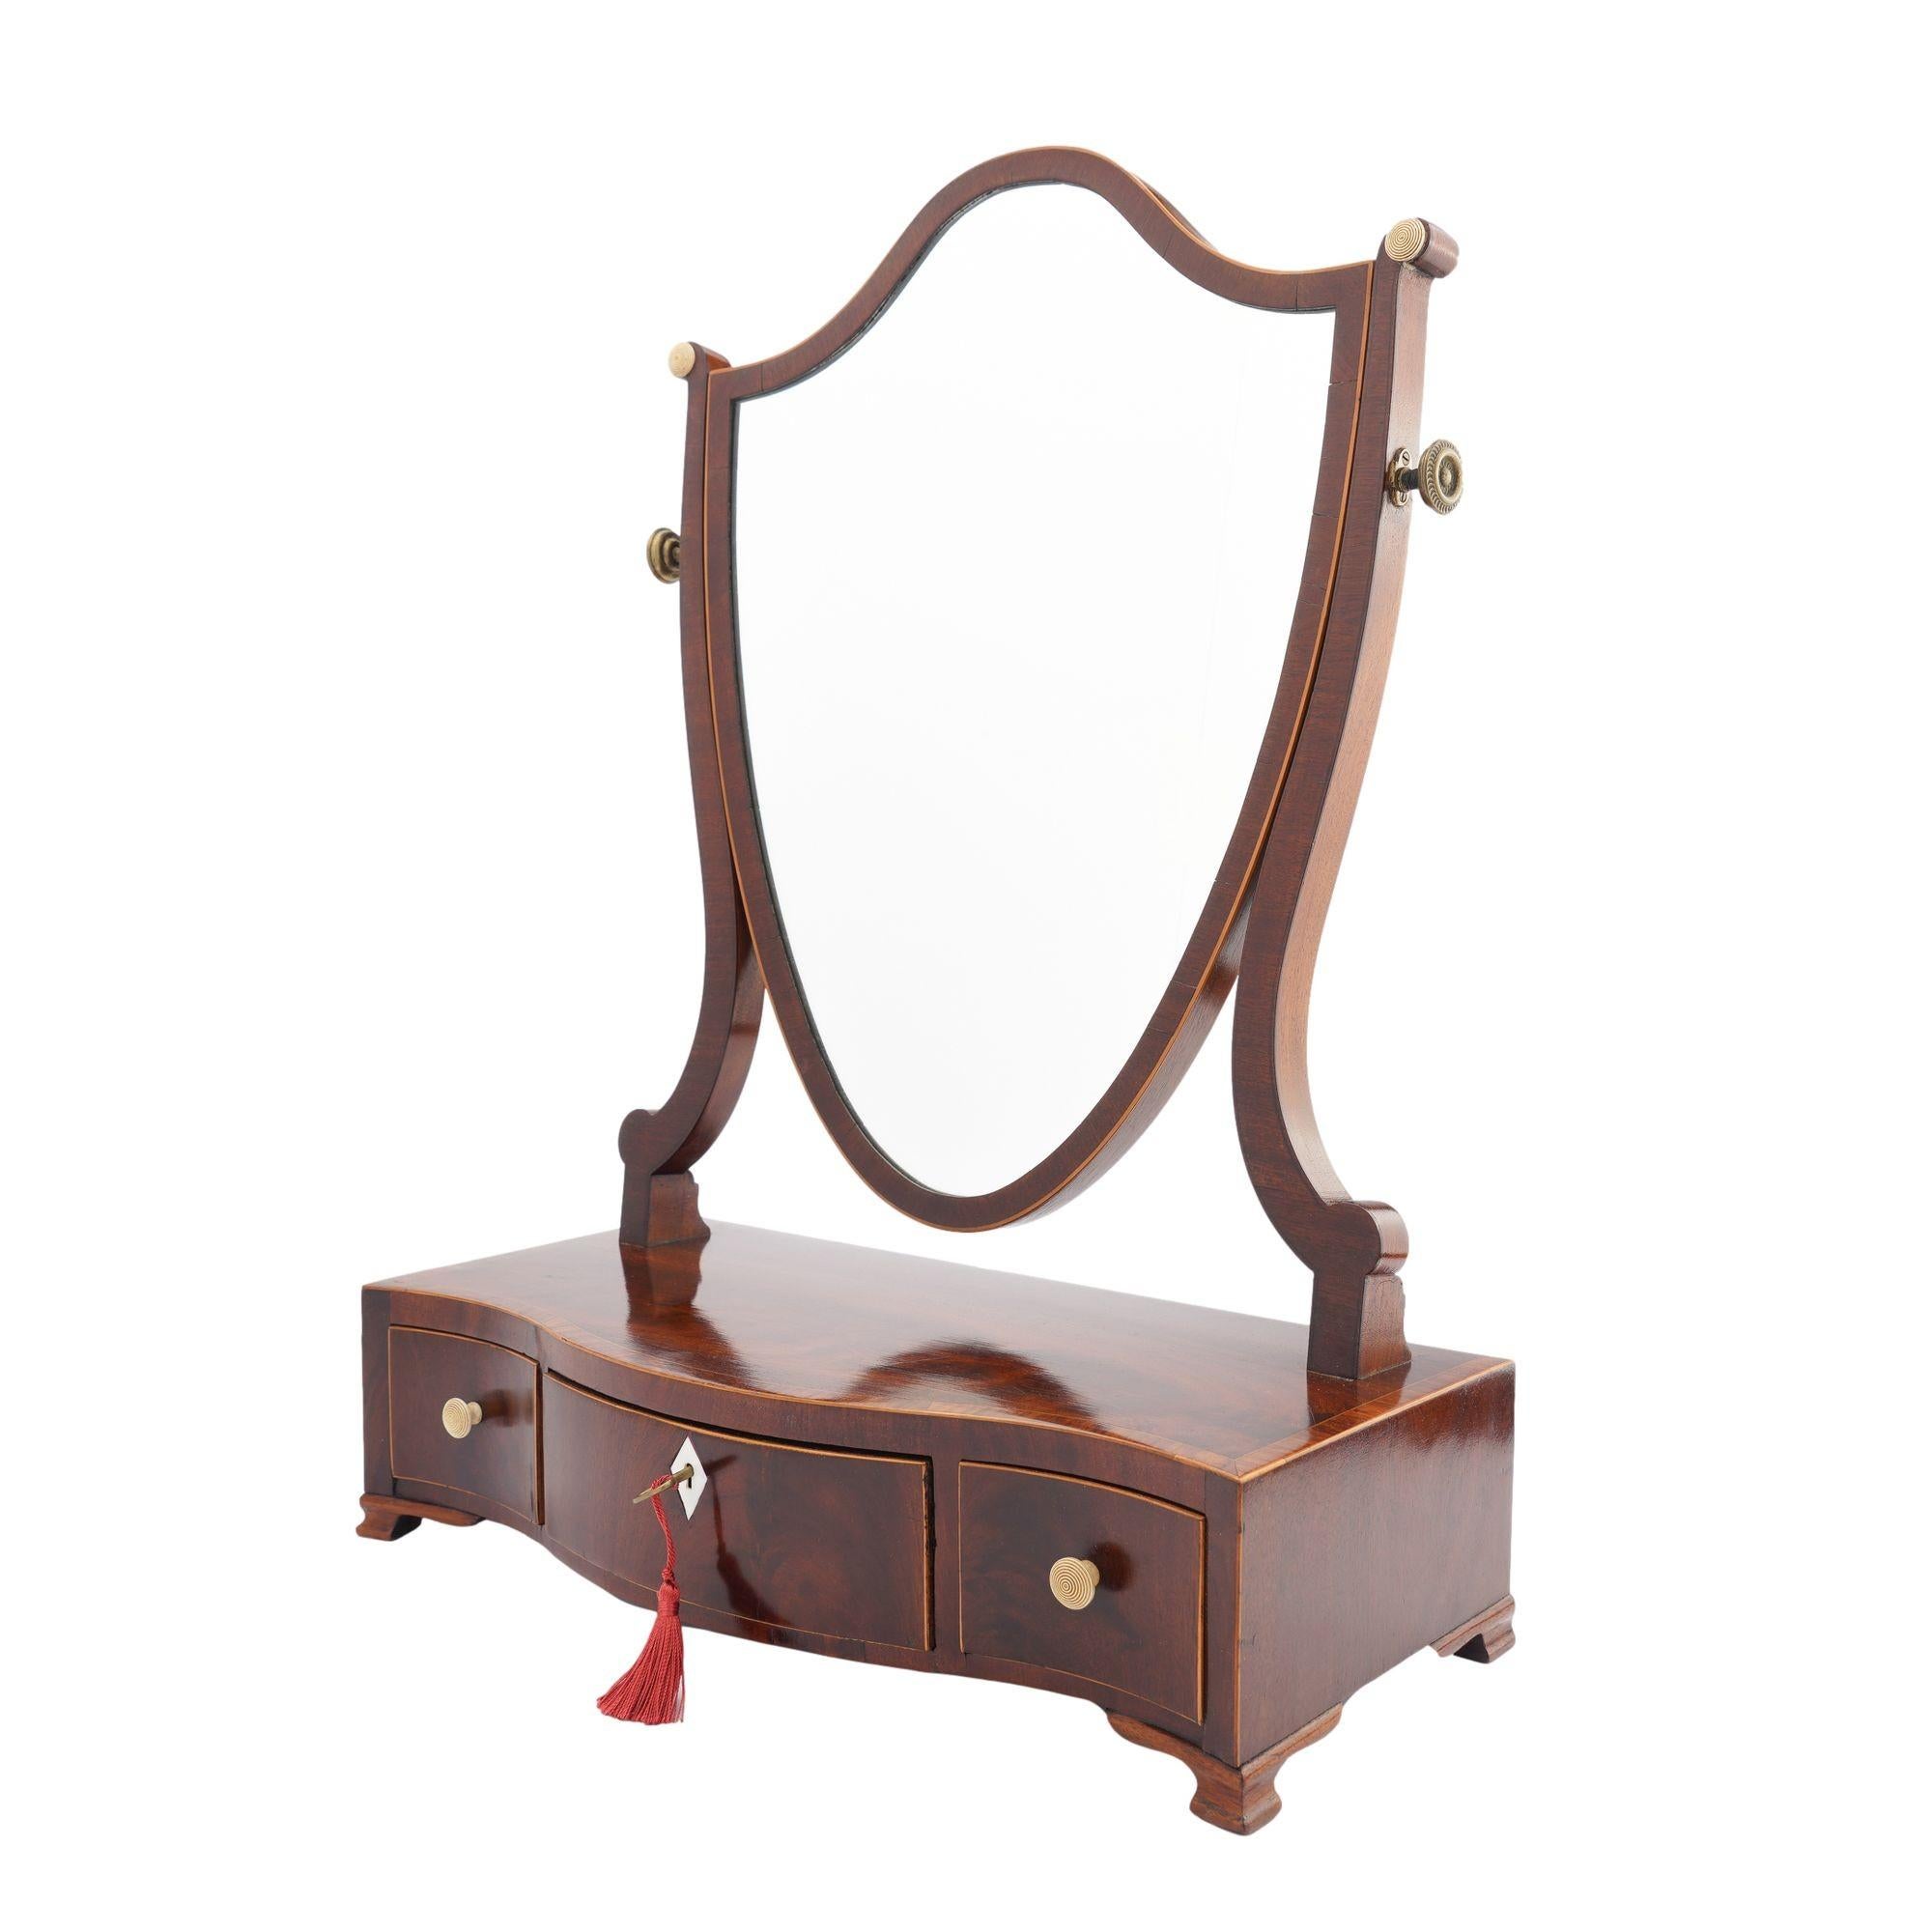 Mahogany swinger shield dressing mirror on a serpentine box stand with divided drawer and ogee bracket feet. The center drawer is fitted with an bone key escutcheon and is flanked by smaller drawers each fitted with turned bone knobs. The shield